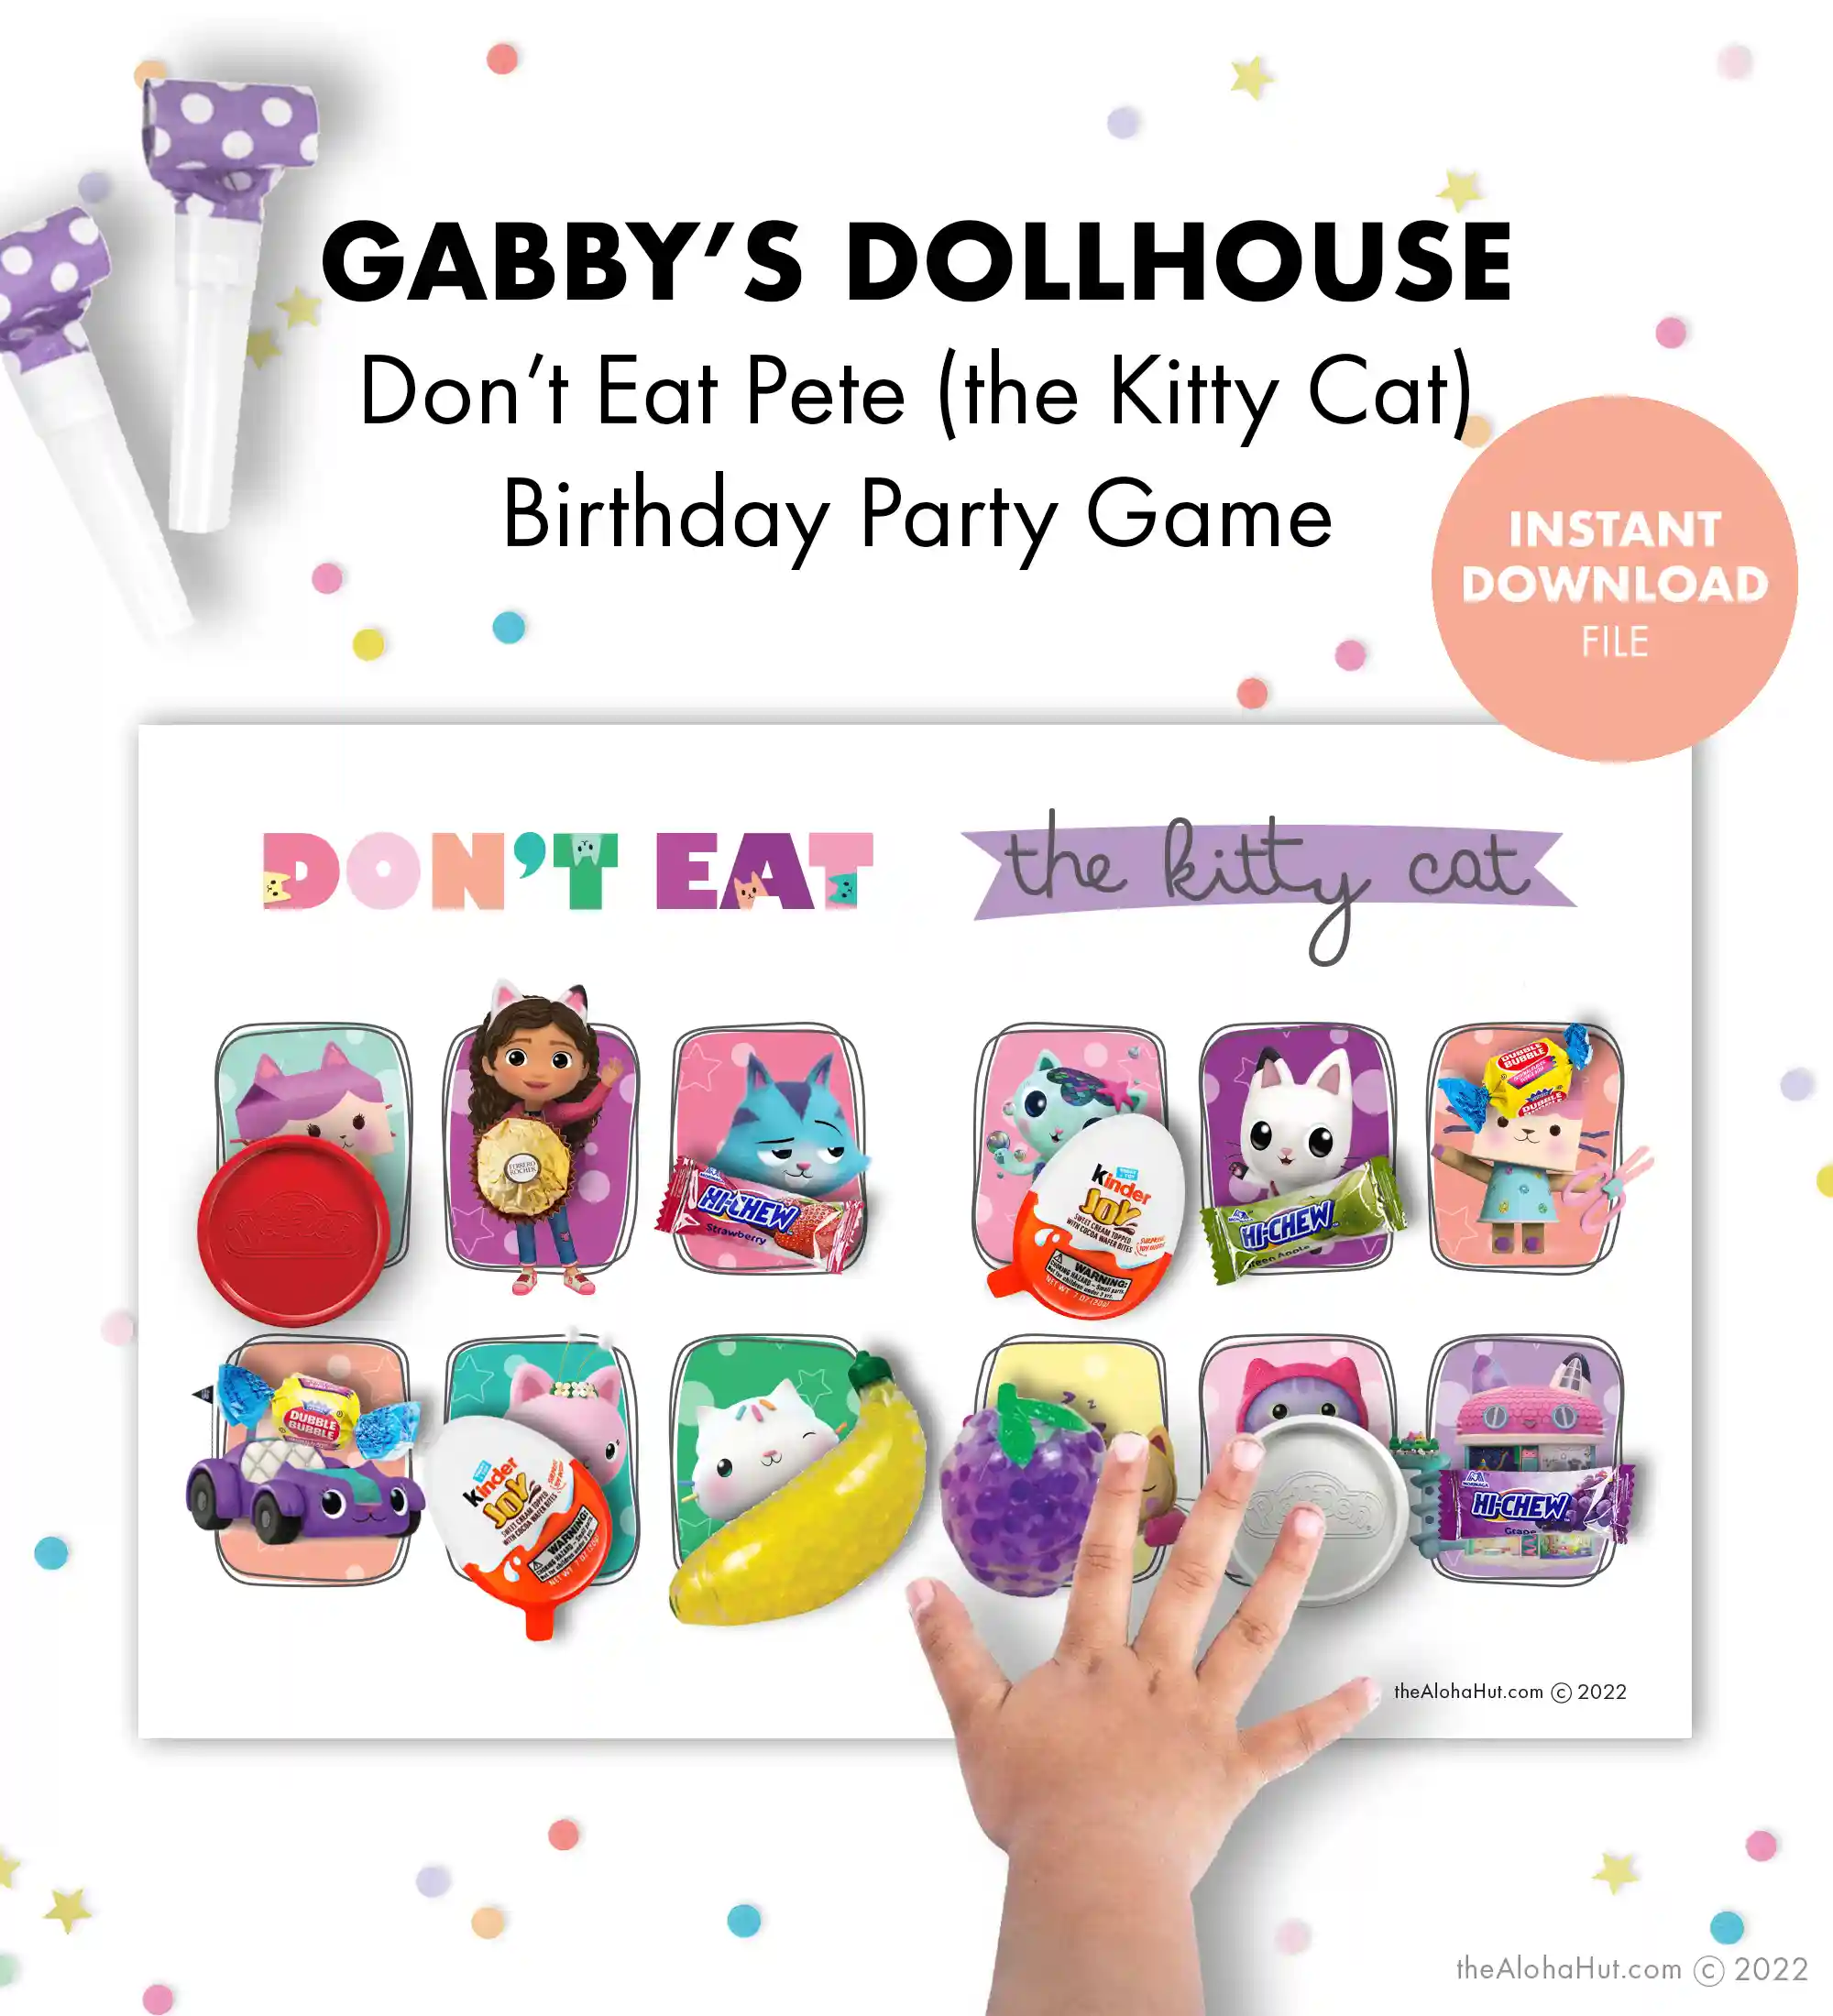 Favorite Gabby's Dollhouse birthday party games and activities include Gabby's Dollhouse Bingo, Don't Eat Pete (the Kitty Cat), Pin the Tail games but Gabby's Dollhouse themed. Toddlers and kids love Gabby's Dollhouse Cake Walk or Cupcake Walk game with their favorite Gabby's Dollhouse songs and cupcake toppers, and a Gabby's Dollhouse coloring sheet.